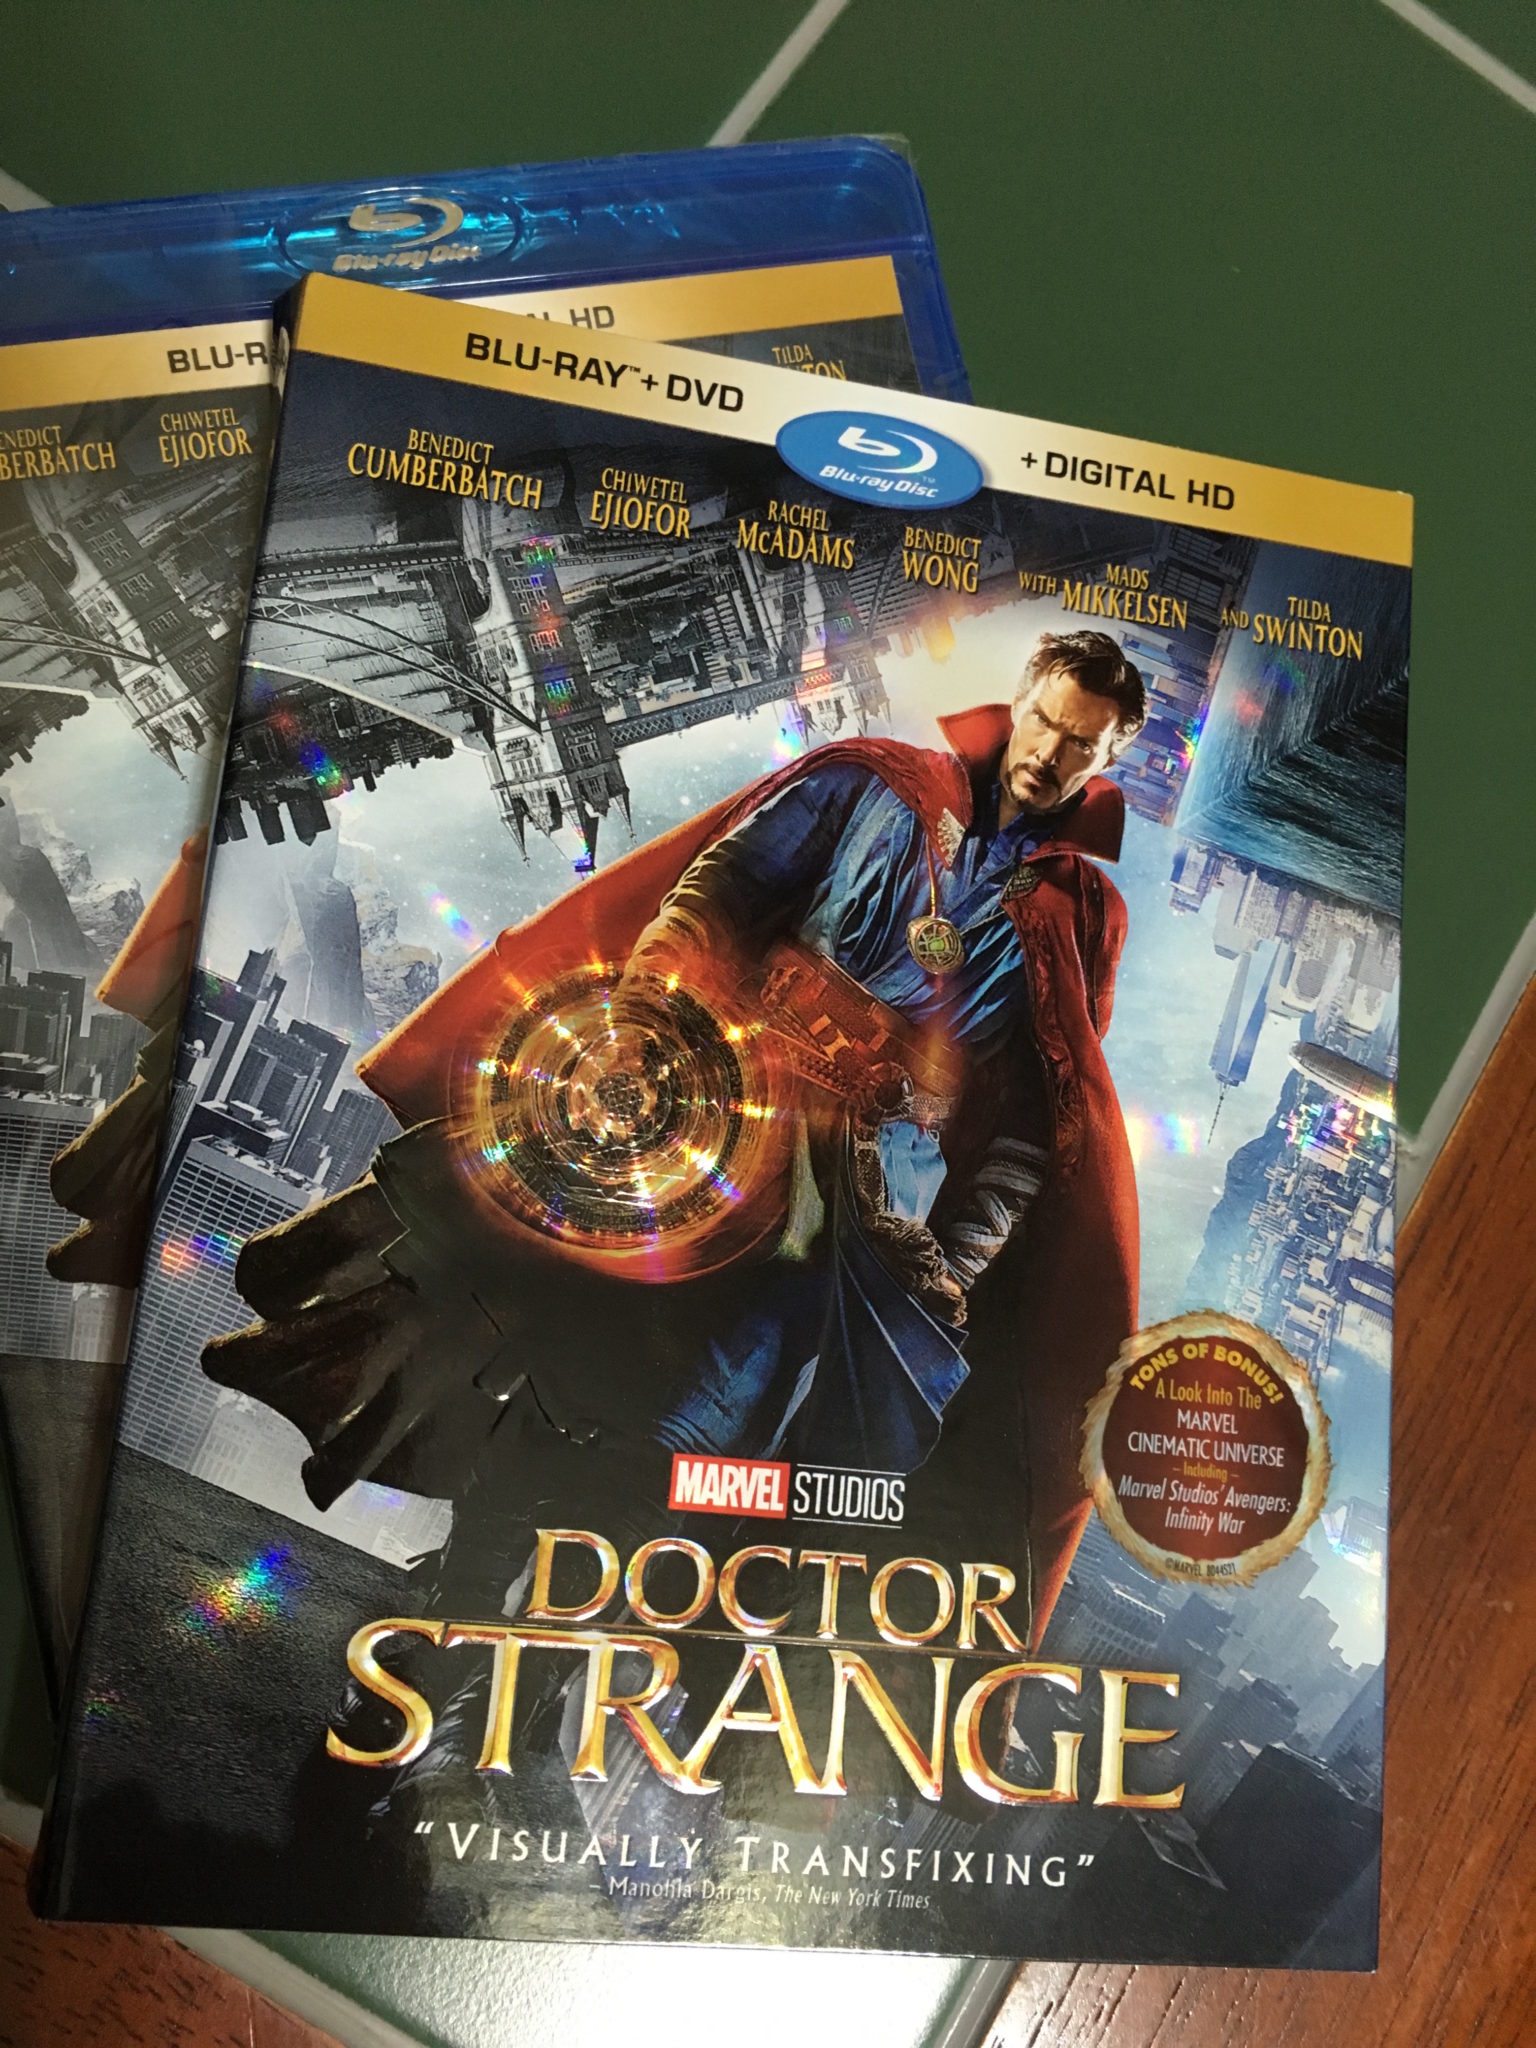 Take a Journey into the Arcane with the “Doctor Strange” Blu-Ray Review